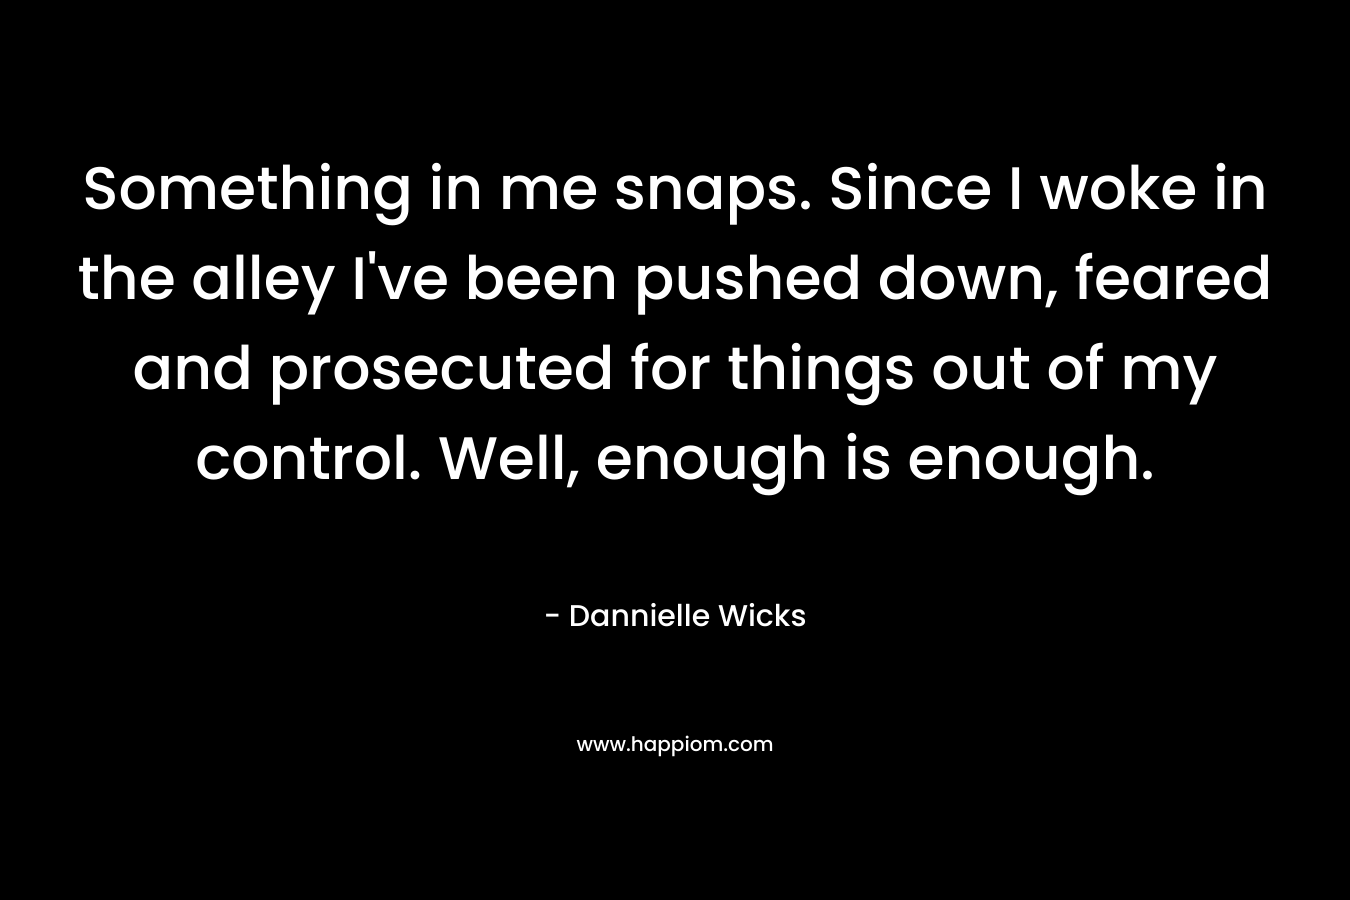 Something in me snaps. Since I woke in the alley I’ve been pushed down, feared and prosecuted for things out of my control. Well, enough is enough. – Dannielle Wicks